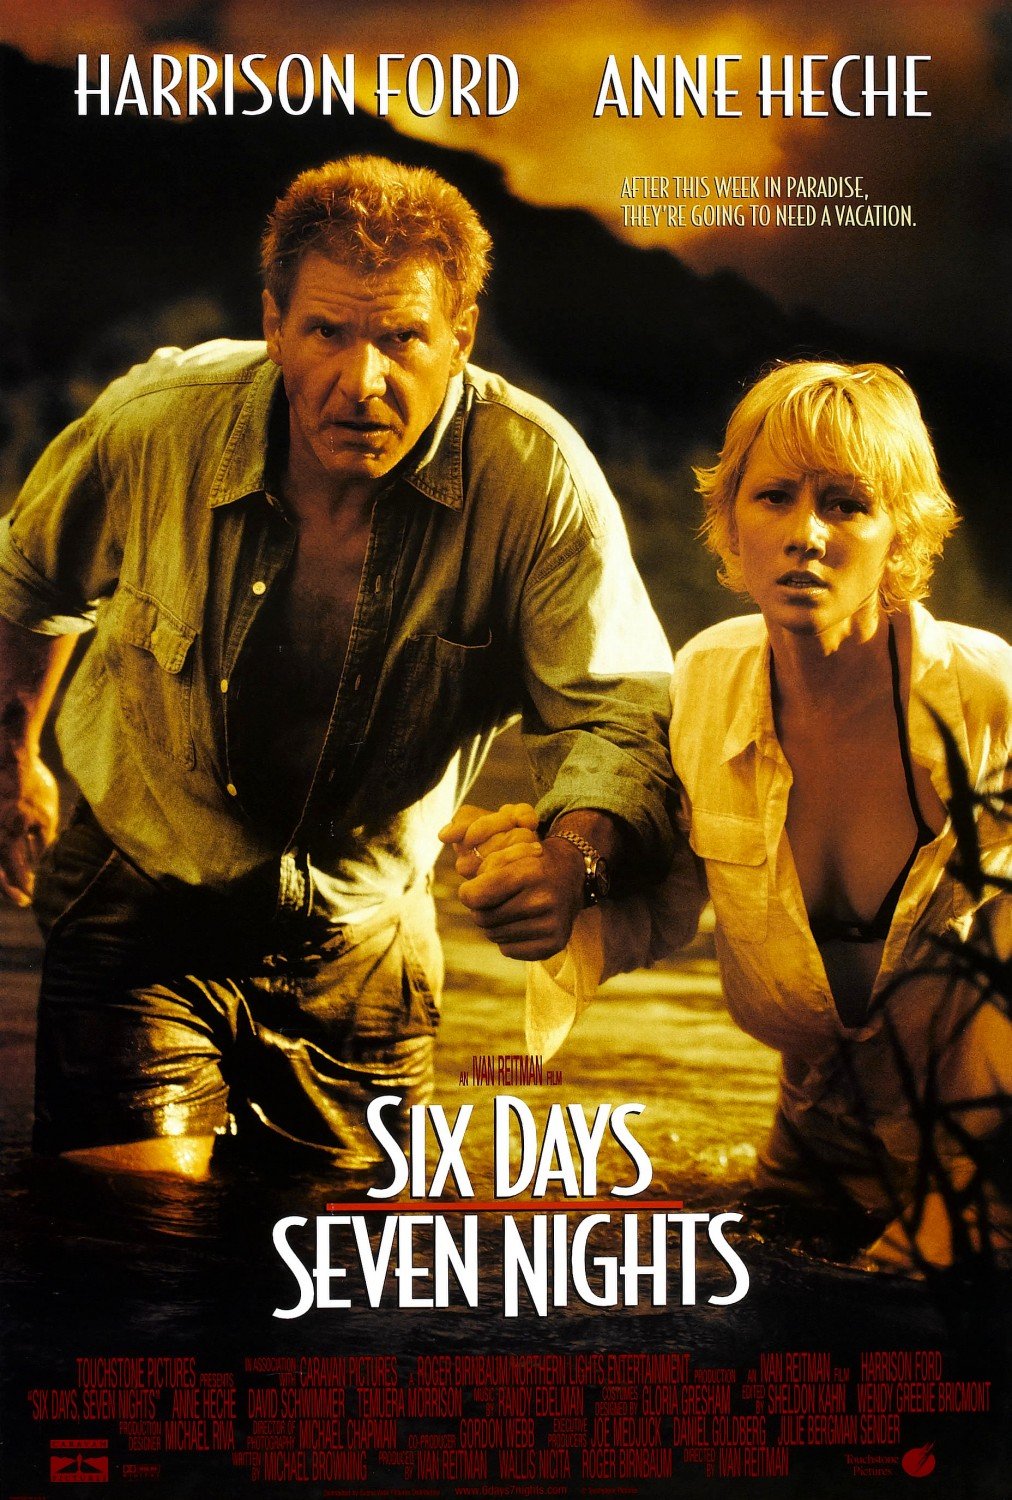 Poster of the movie Six Days, Seven Nights